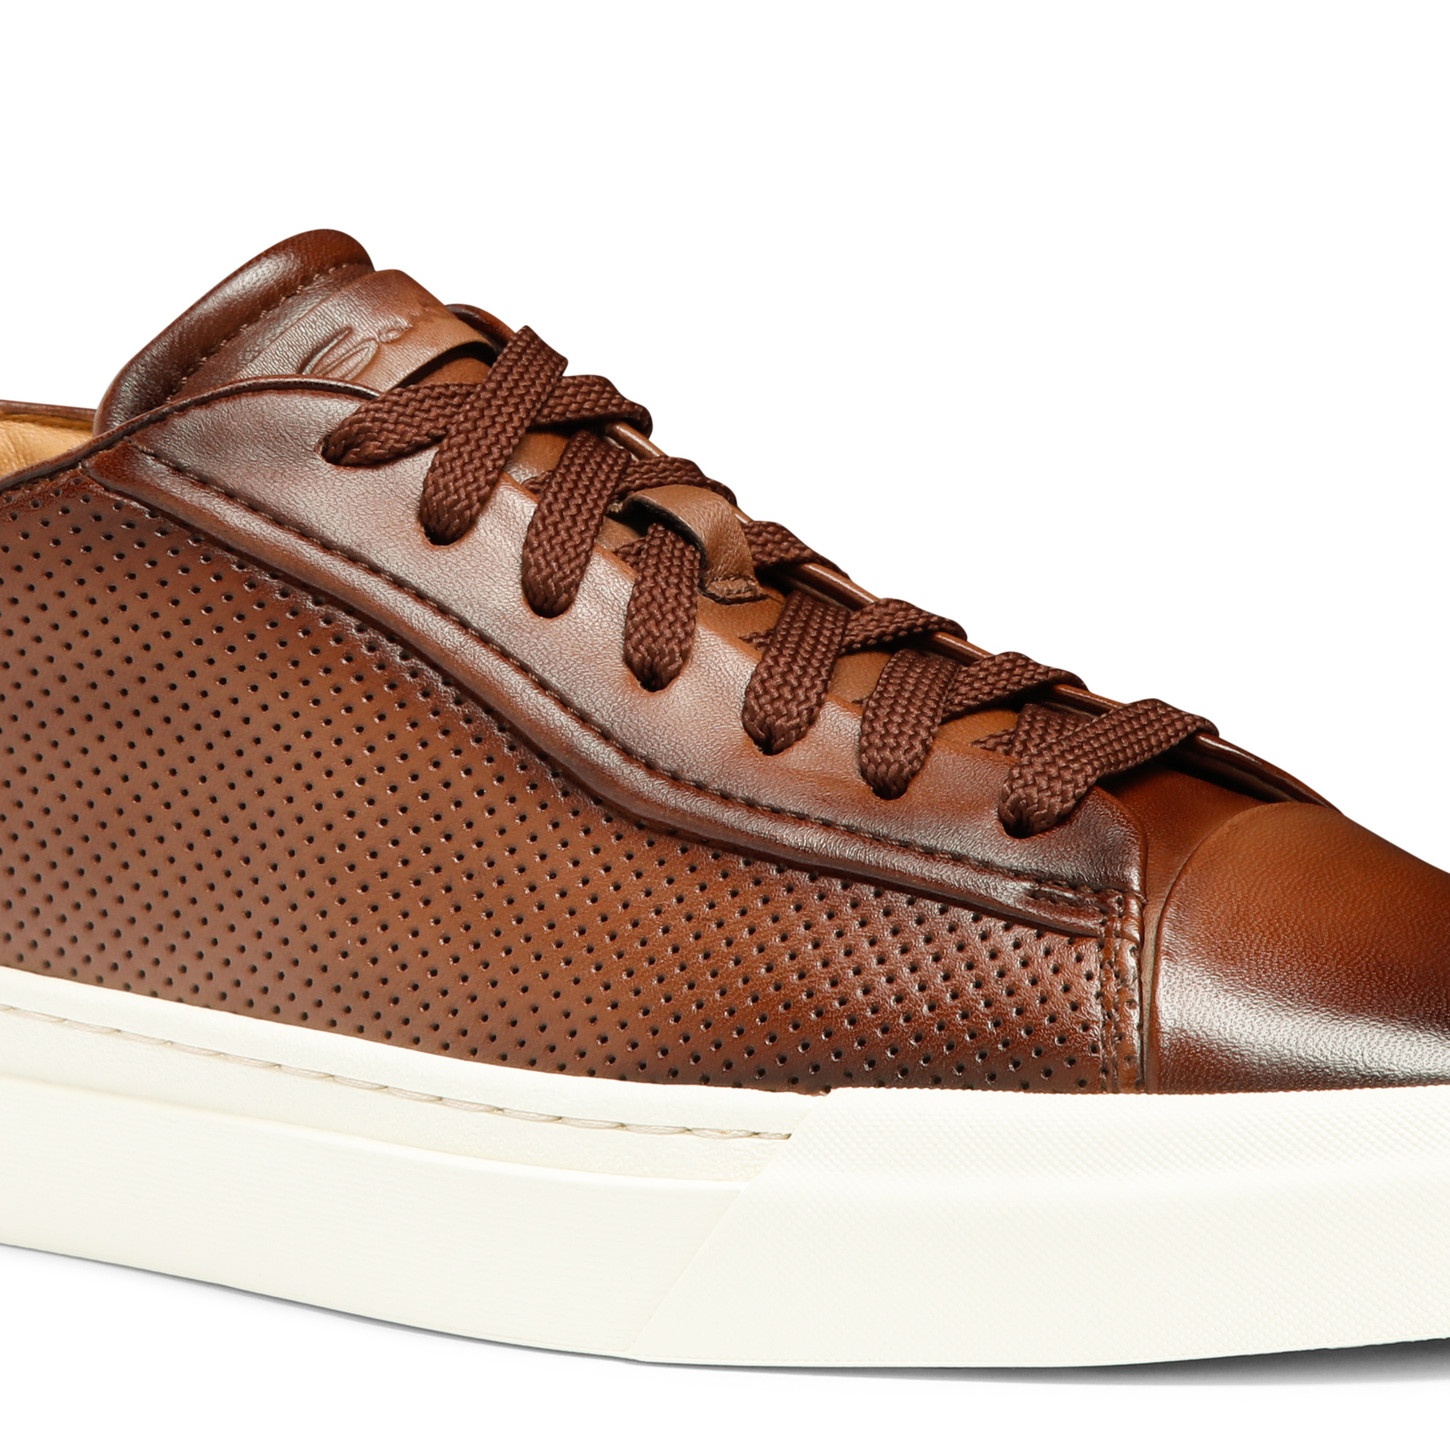 Men's polished brown leather perforated-effect sneaker - 6